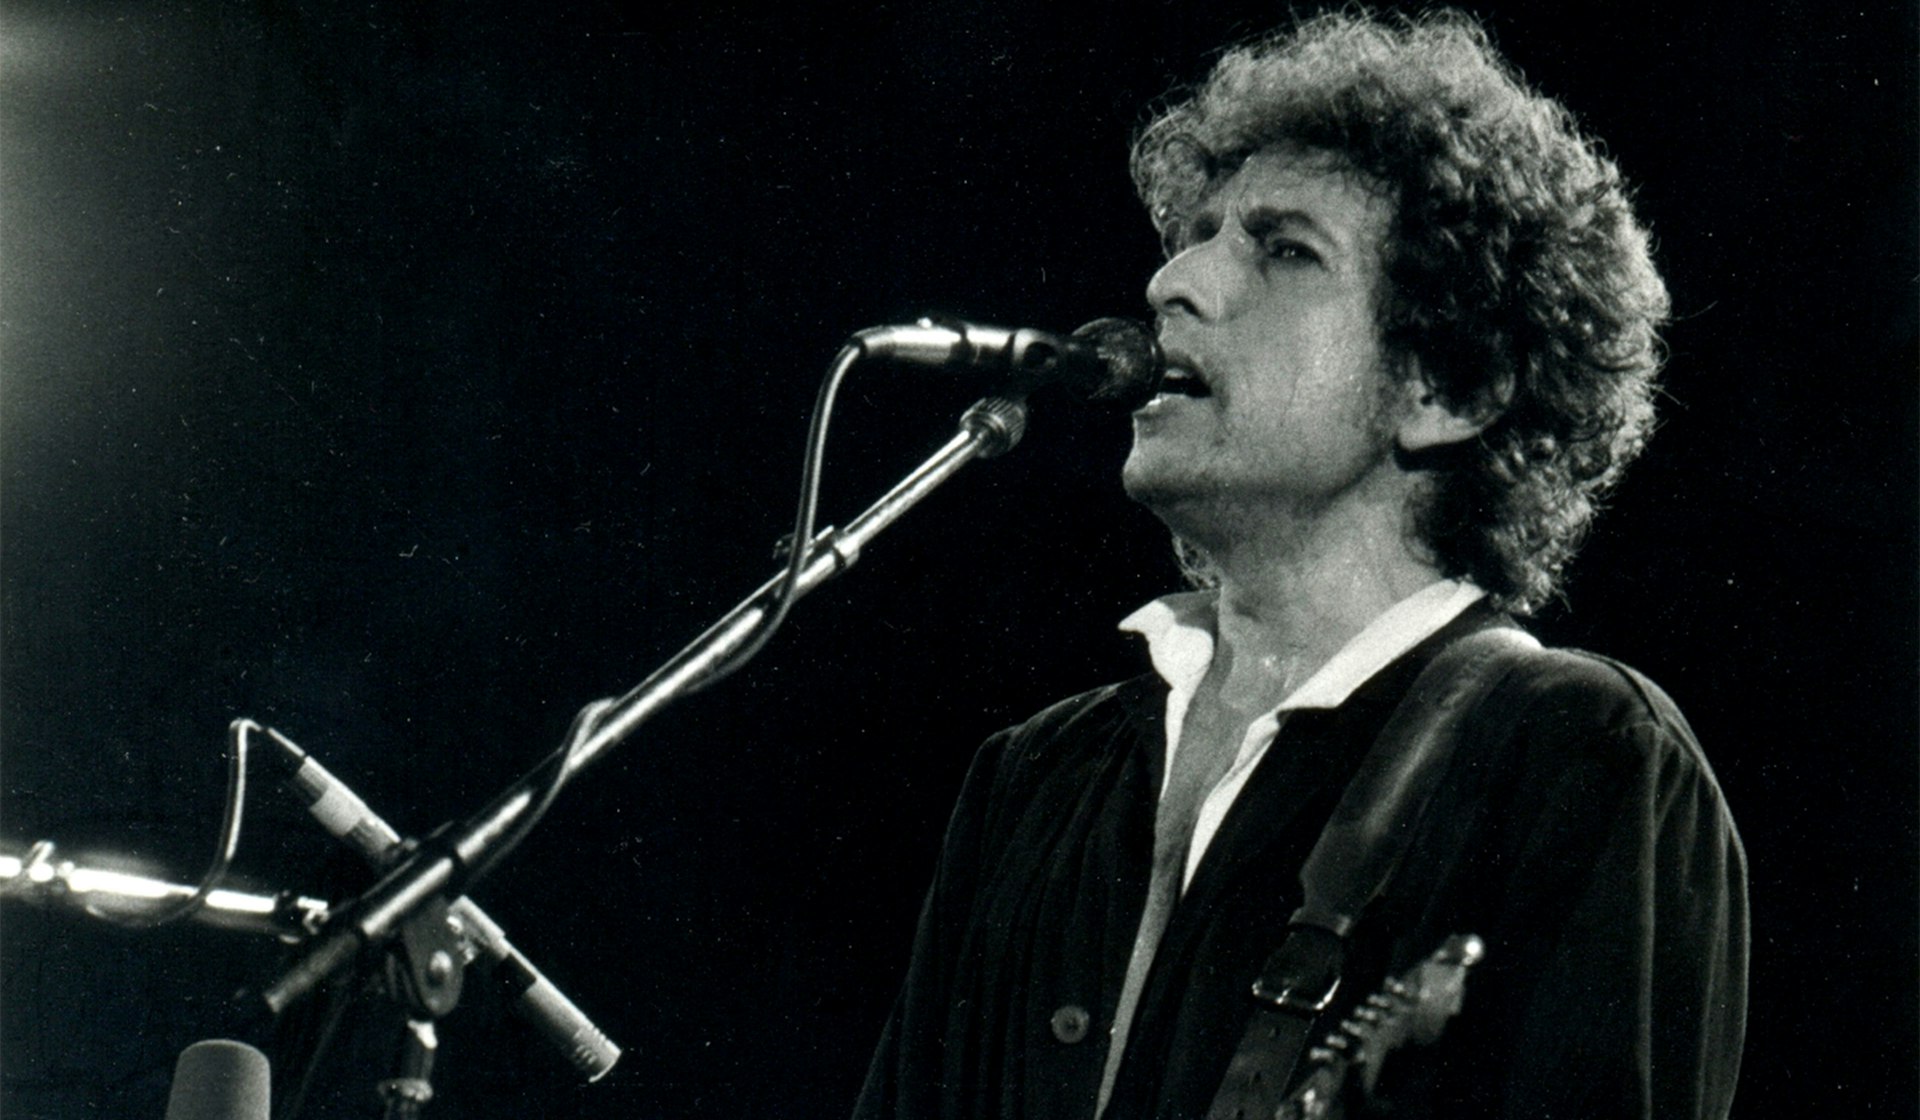 'The engine, the motor, of Dylan’s best work is empathy'